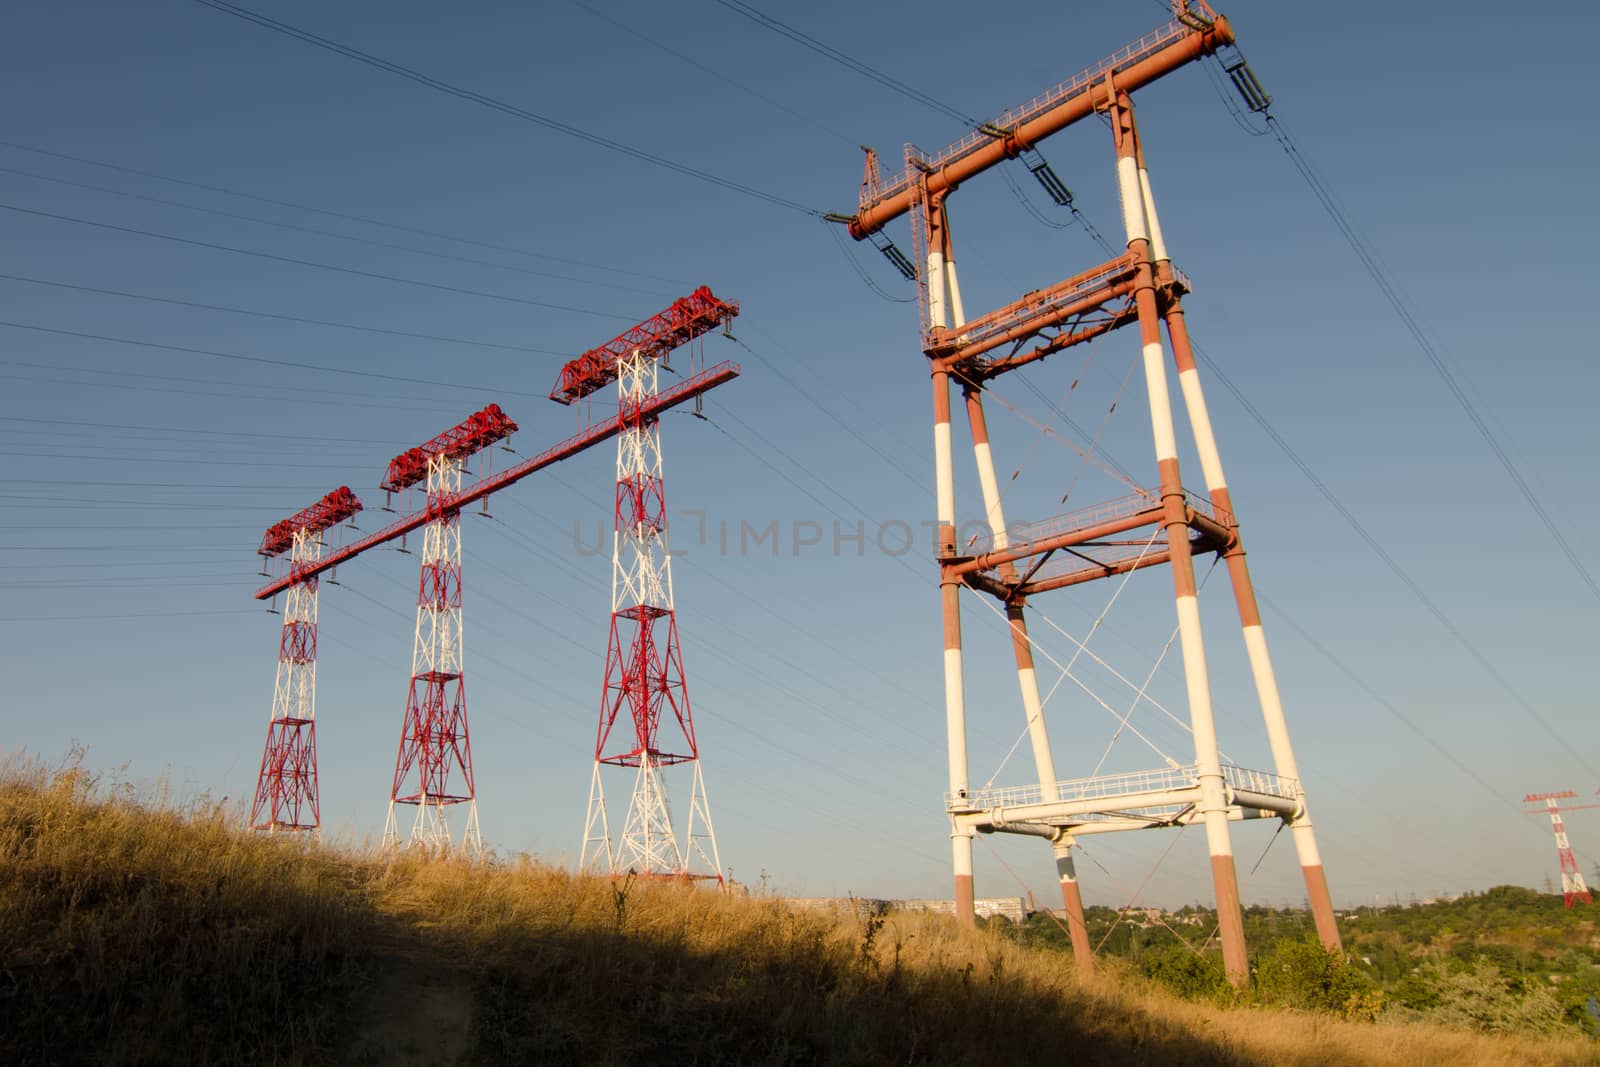 supports of high-voltage power lines against the blue sky